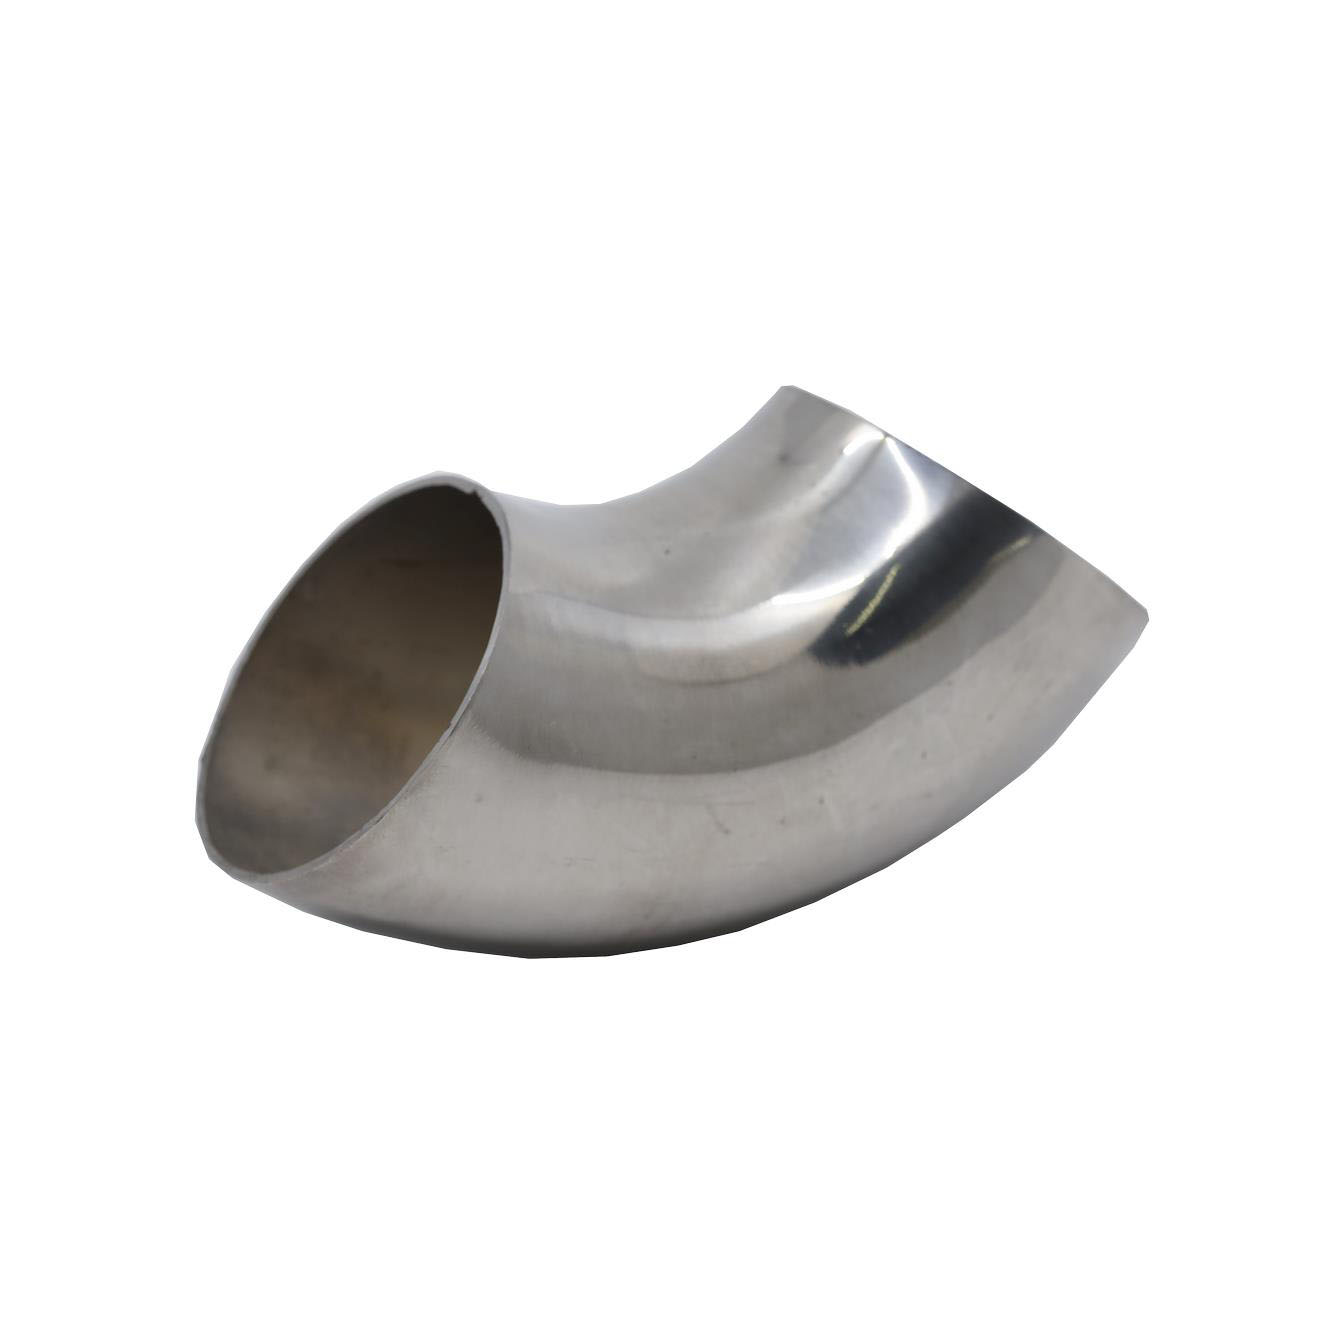 Buy Stainless Rail Pipe Elbow Connector 1.5mm Thickness 304/Welding (EB-13-508-15) Online | Qetaat.com | First construction & industrial platform in Bahrain